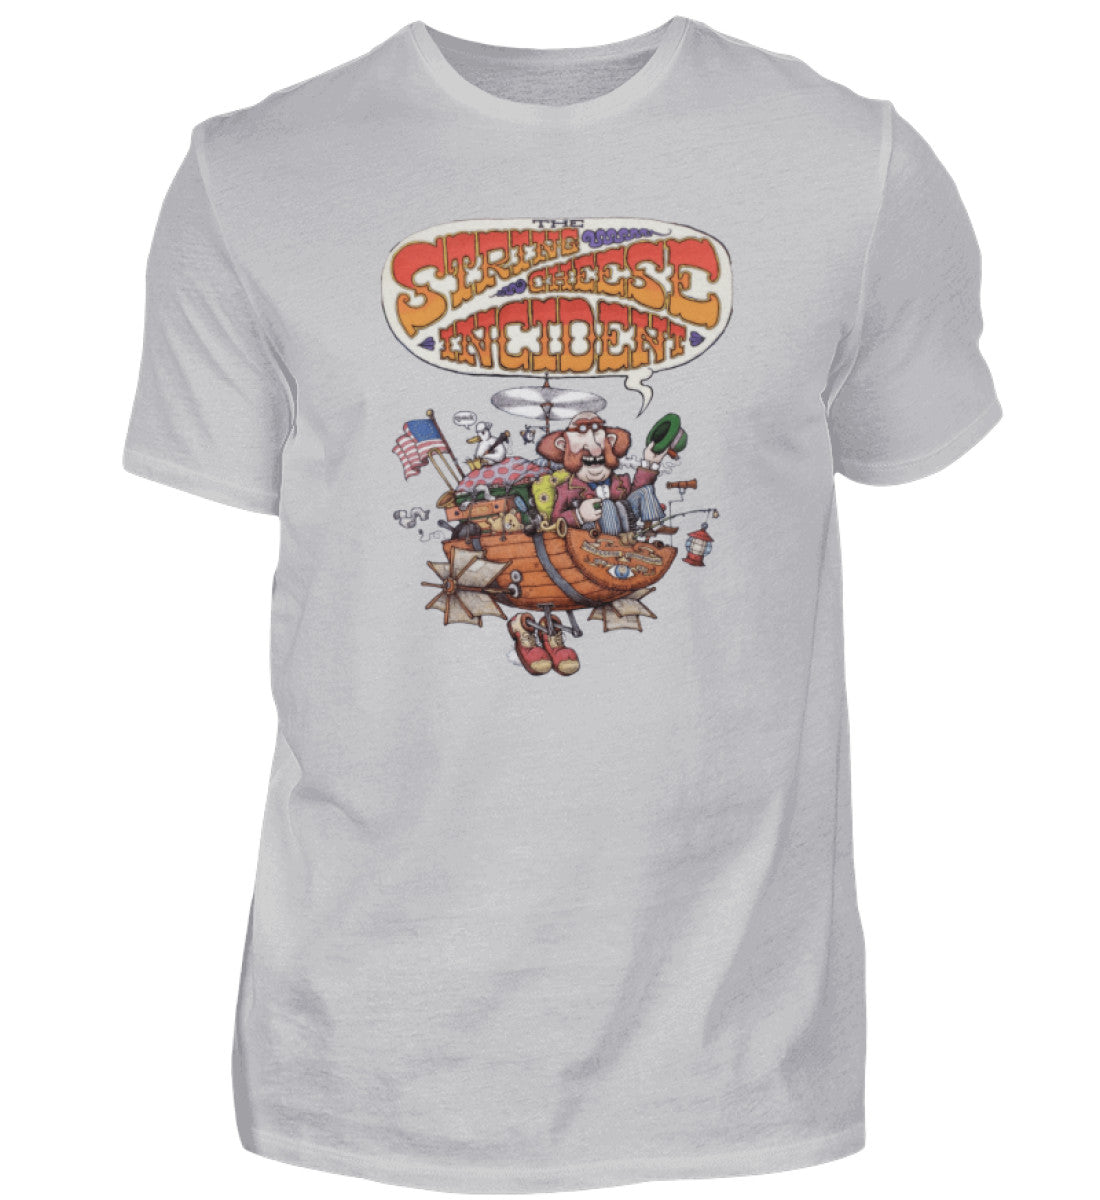 The String Cheese Incident T-Shirt Men